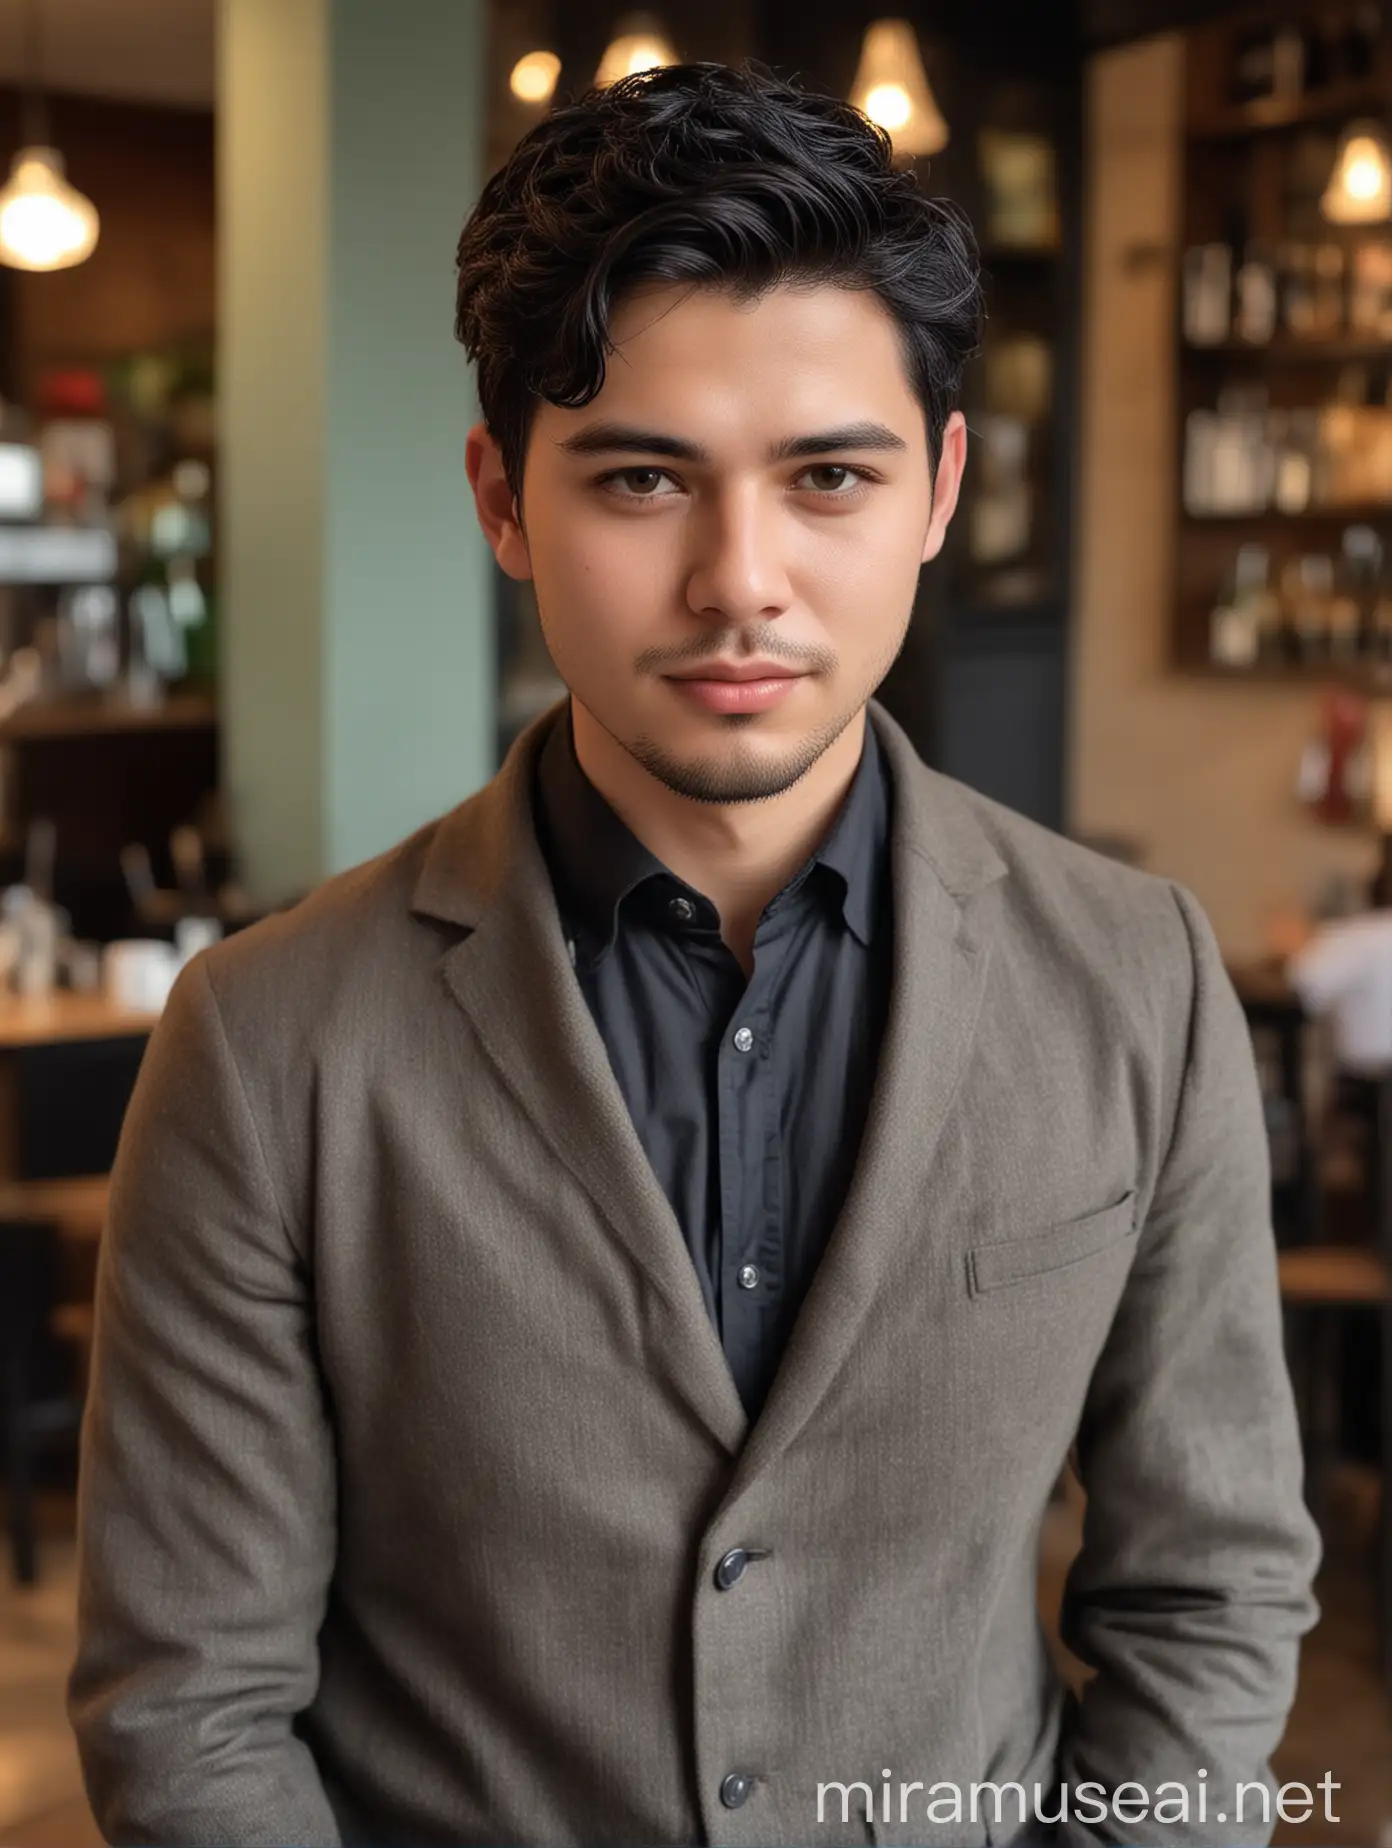 A man about 28 years old slightly chubby face,short hair black hair ,has a noble temperament and is dressed luxuriously. With the cafe as the background, the camera focuses on him. He has an elegant temperament. Facing the camera, he has exquisite facial features and a full body photo.